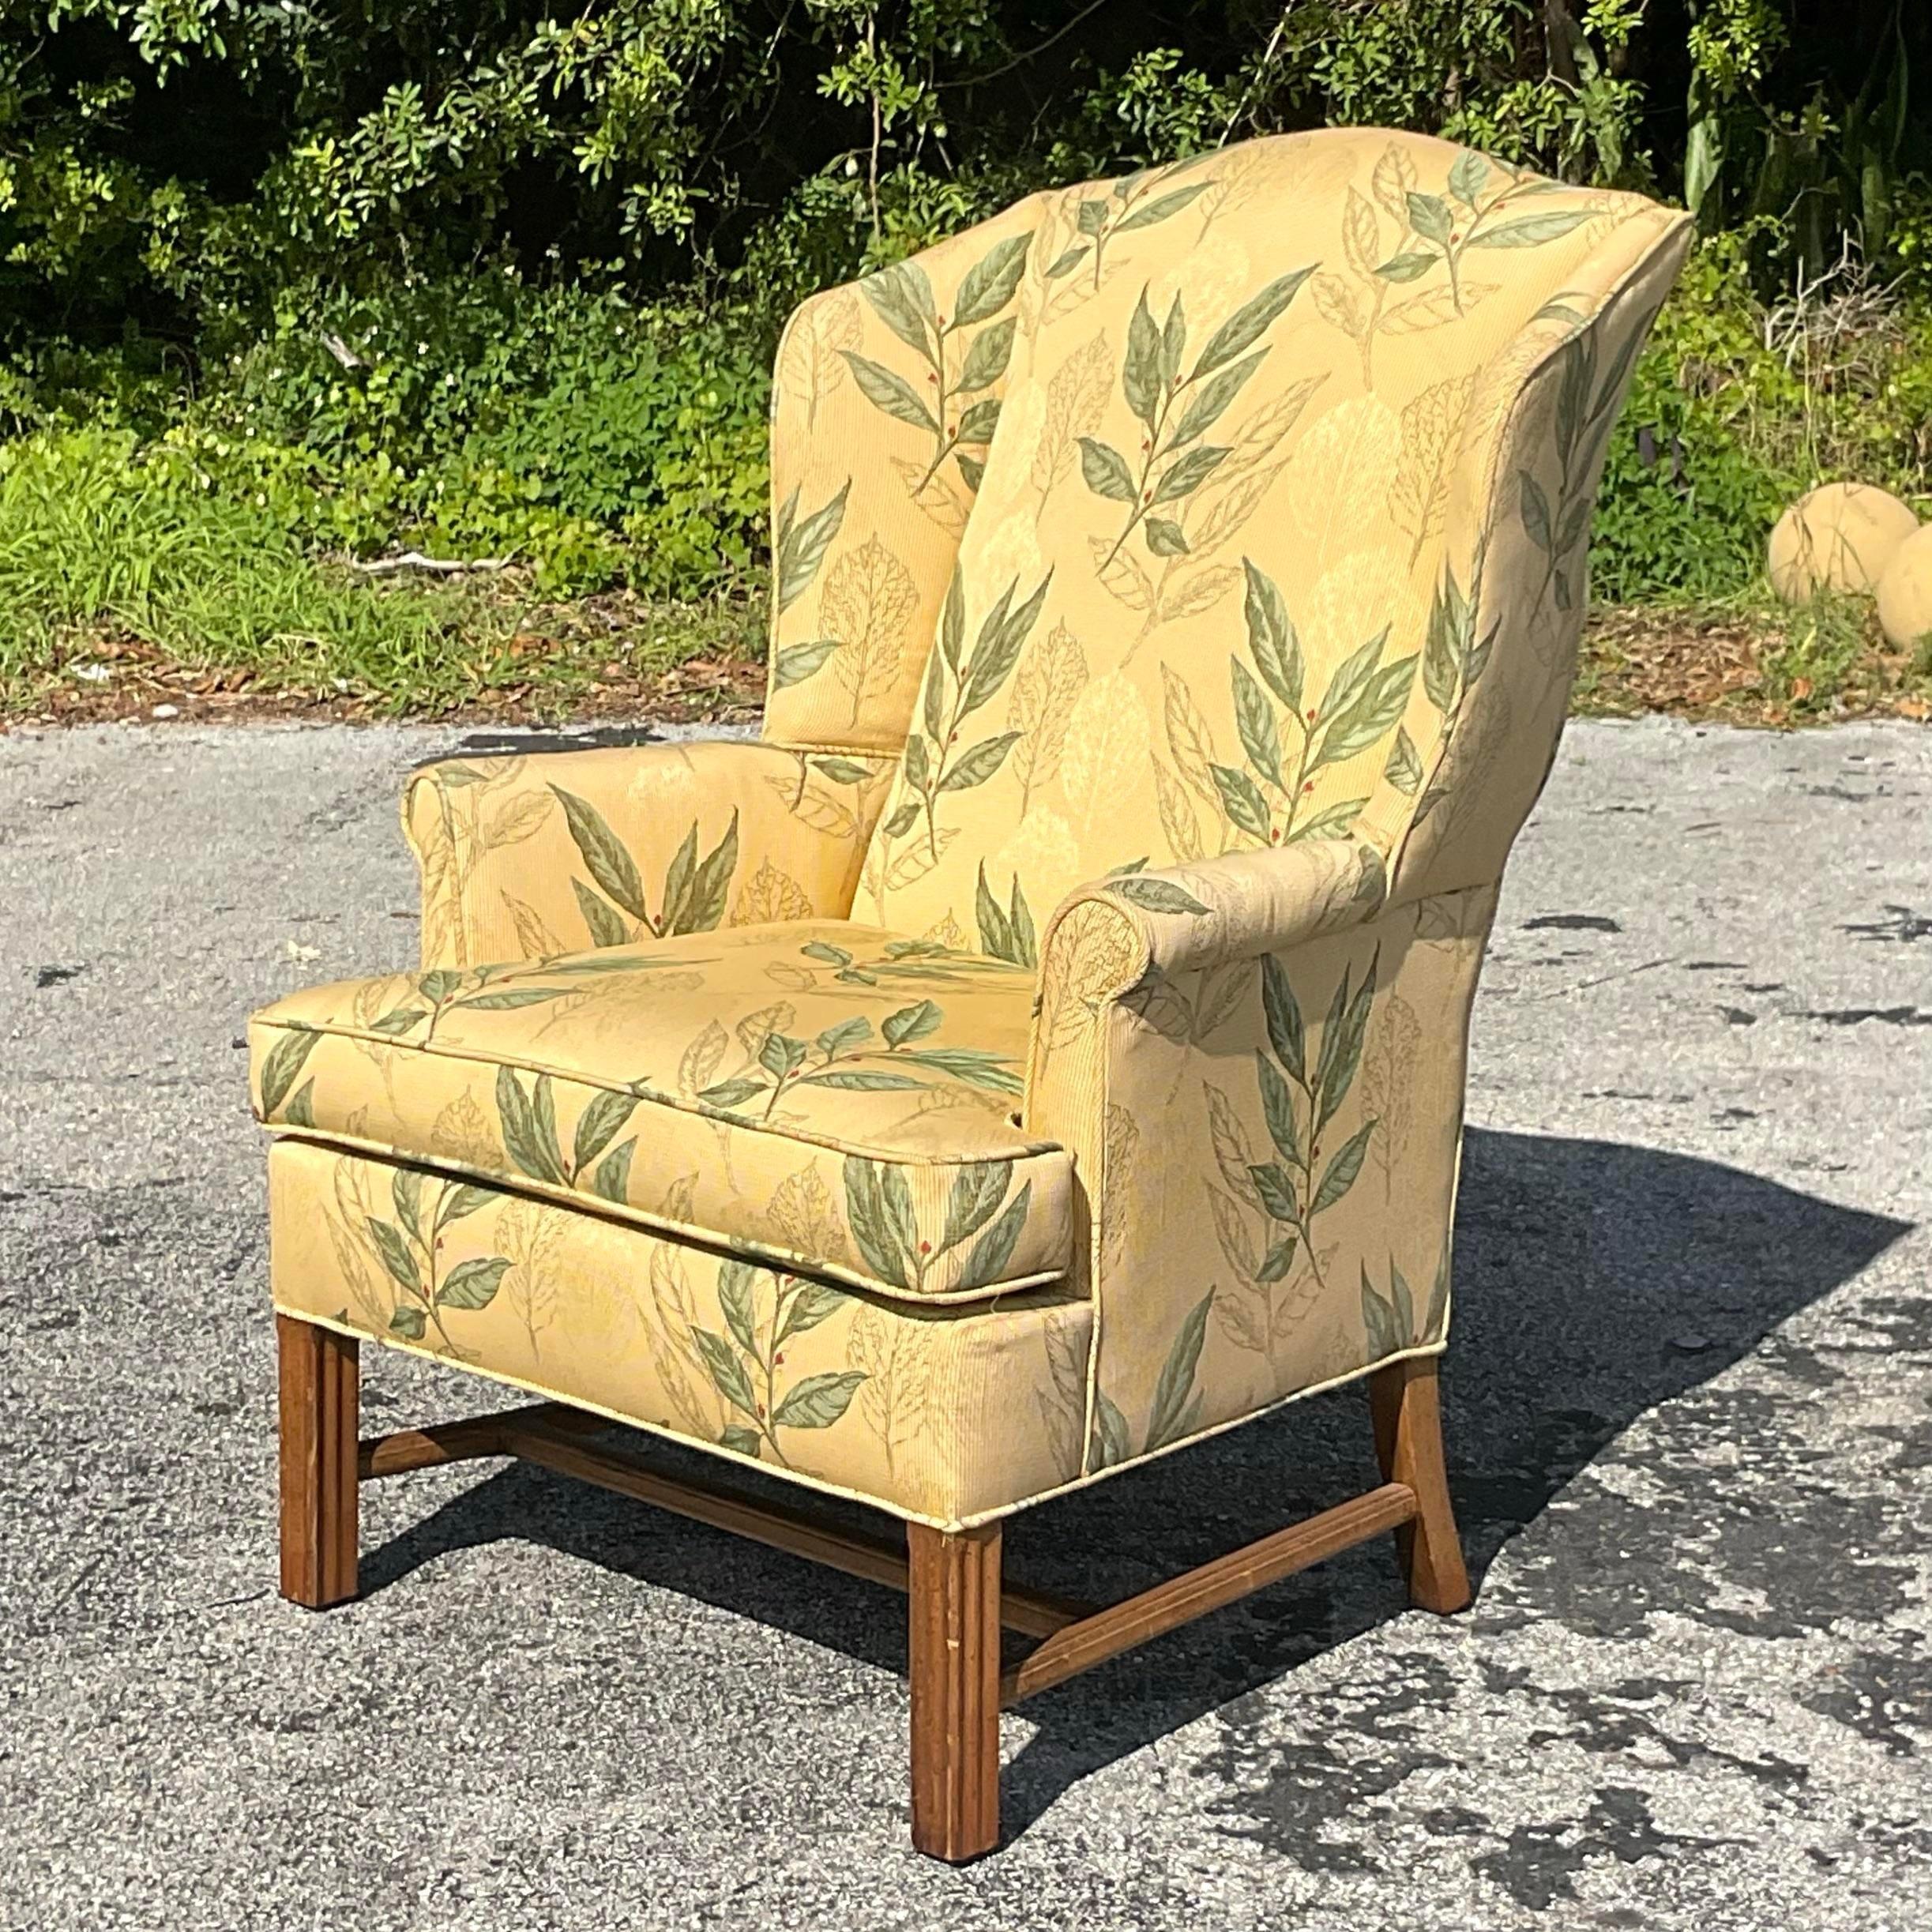 Vintage Wingback Chair with Leaf Print - Embrace eclectic charm with this beautifully crafted wingback chair adorned in a delightful leaf print. A fusion of vintage allure and boho flair, it's the perfect statement piece to infuse your space with